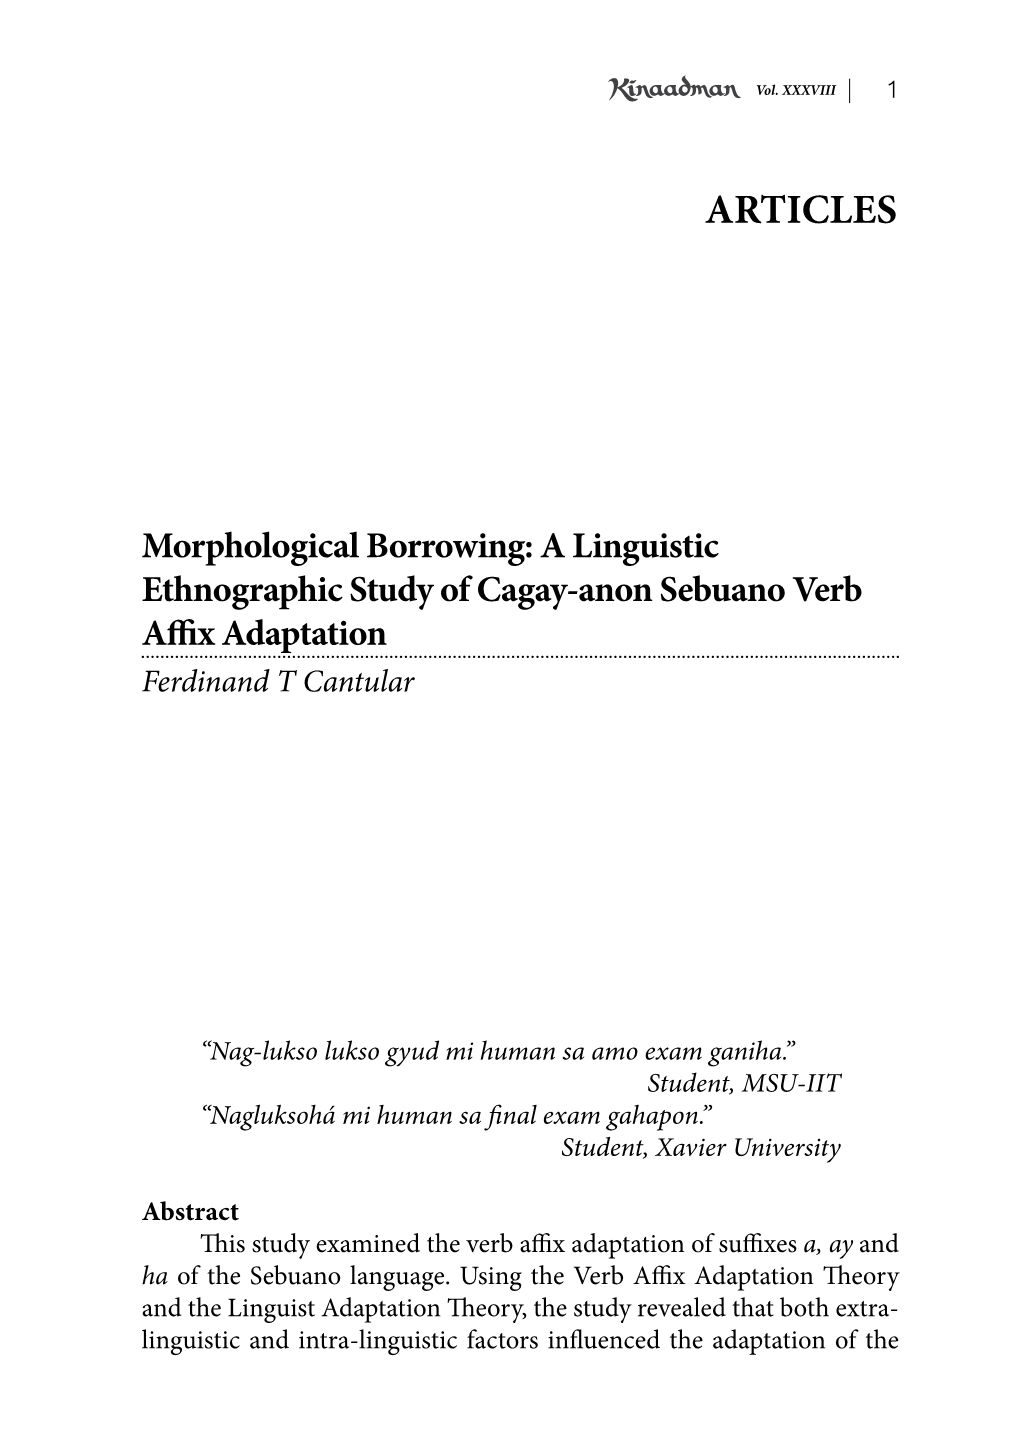 Morphological Borrowing: a Linguistic Ethnographic Study of Cagay-Anon Sebuano Verb Affix Adaptation Ferdinand T Cantular